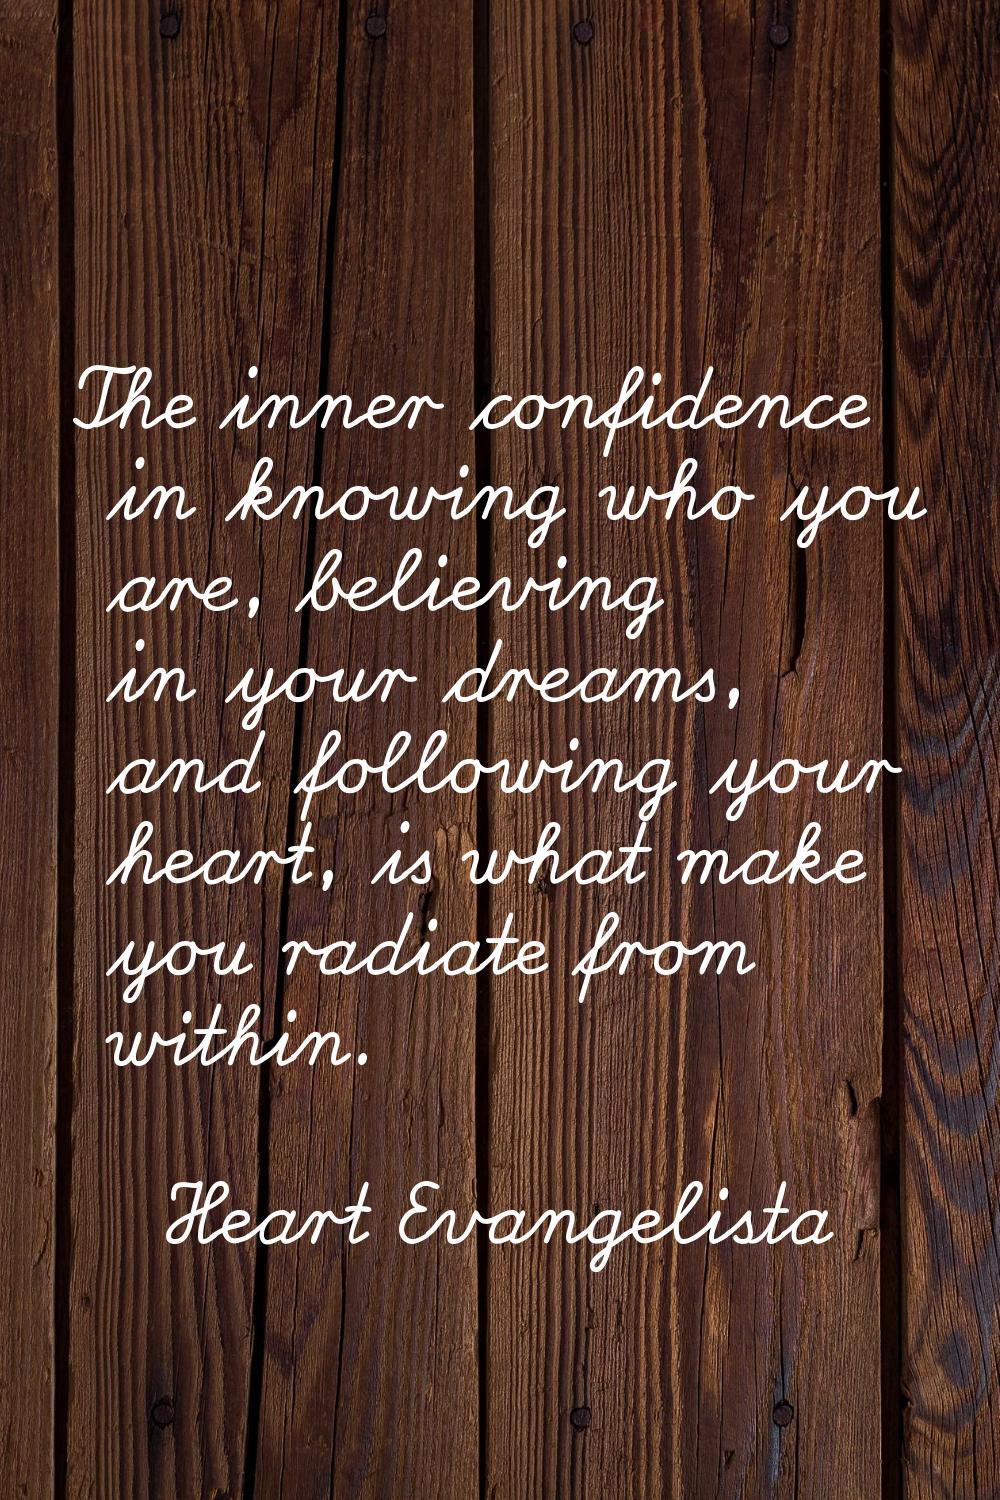 The inner confidence in knowing who you are, believing in your dreams, and following your heart, is